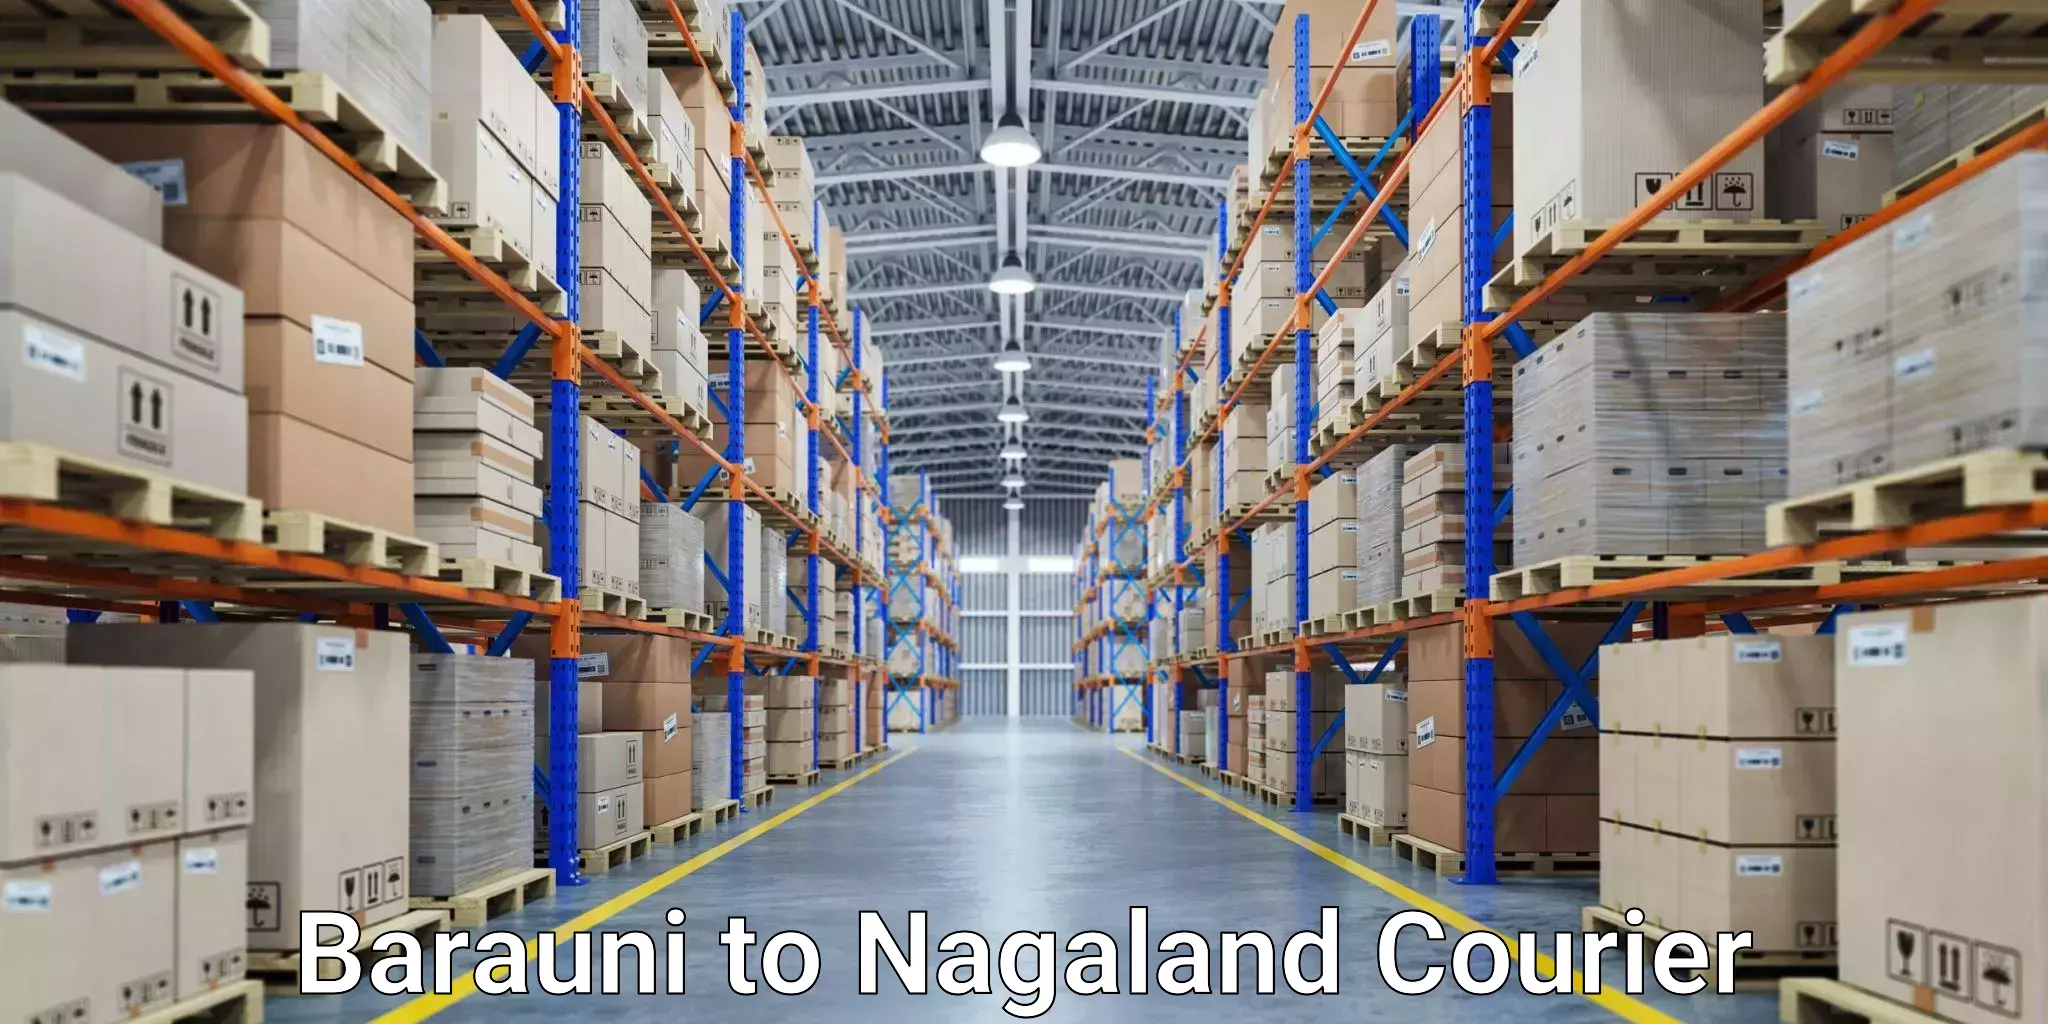 Nationwide parcel services Barauni to Nagaland